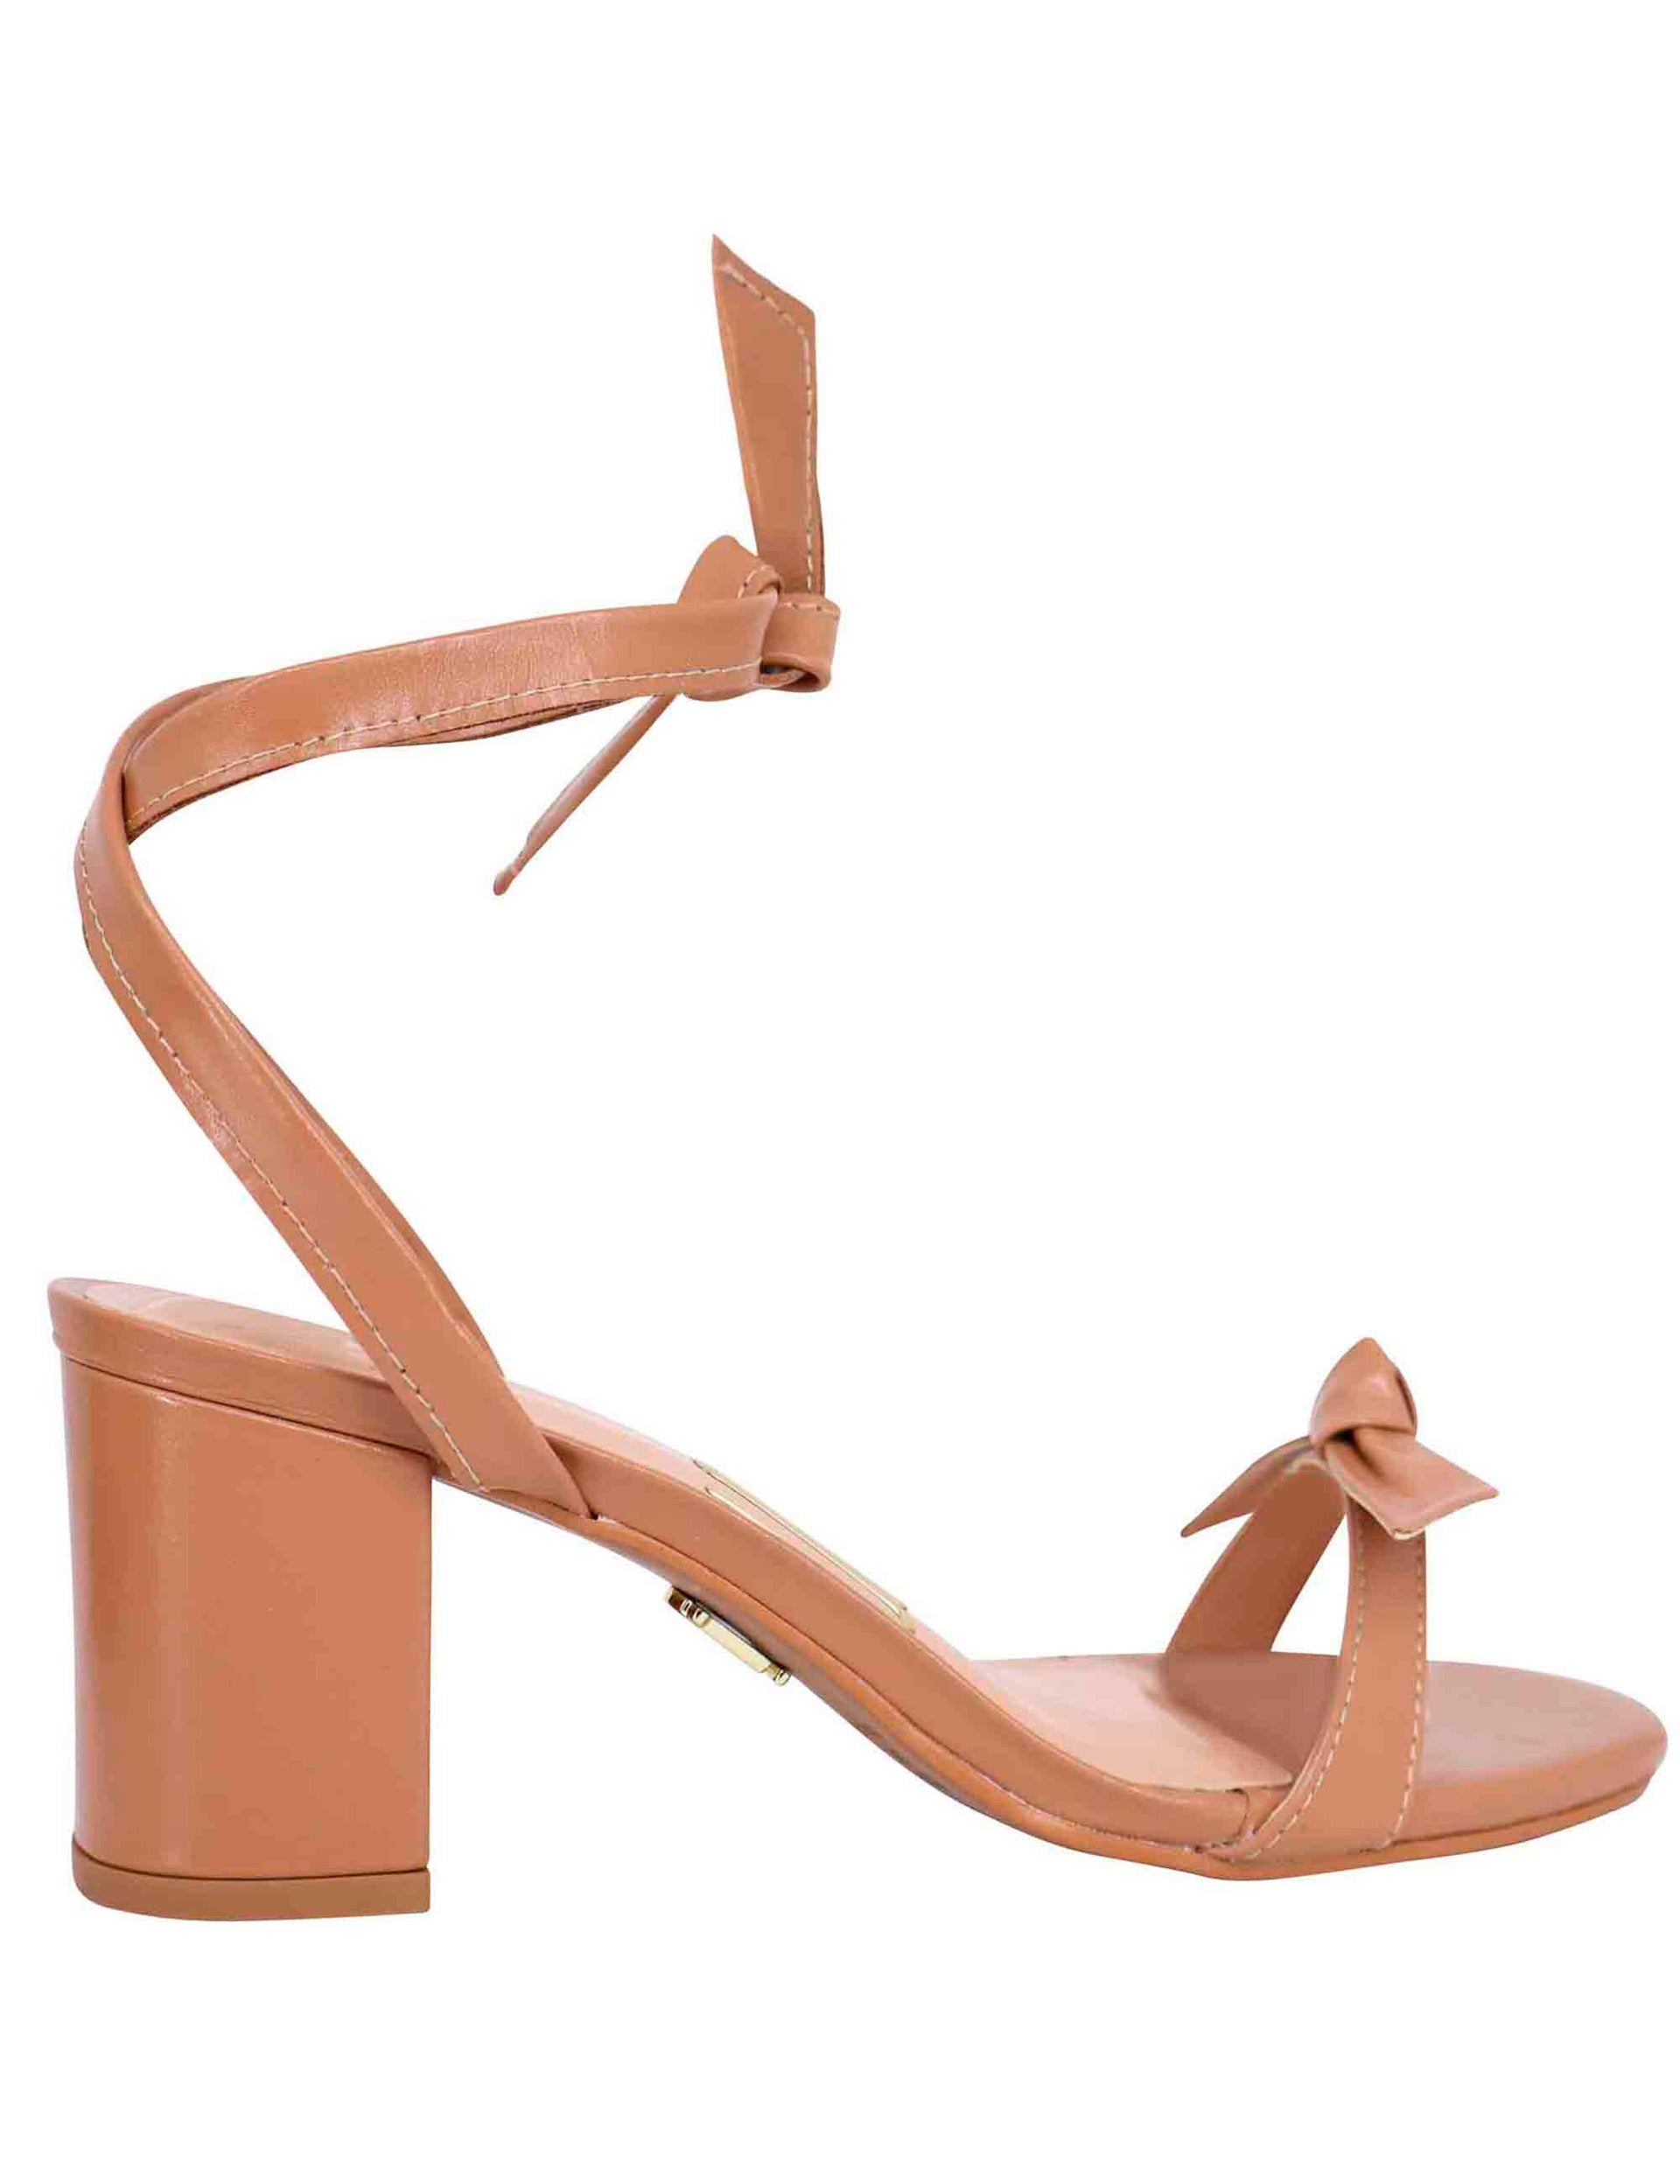 Women's sandals in tan leather and ankle straps